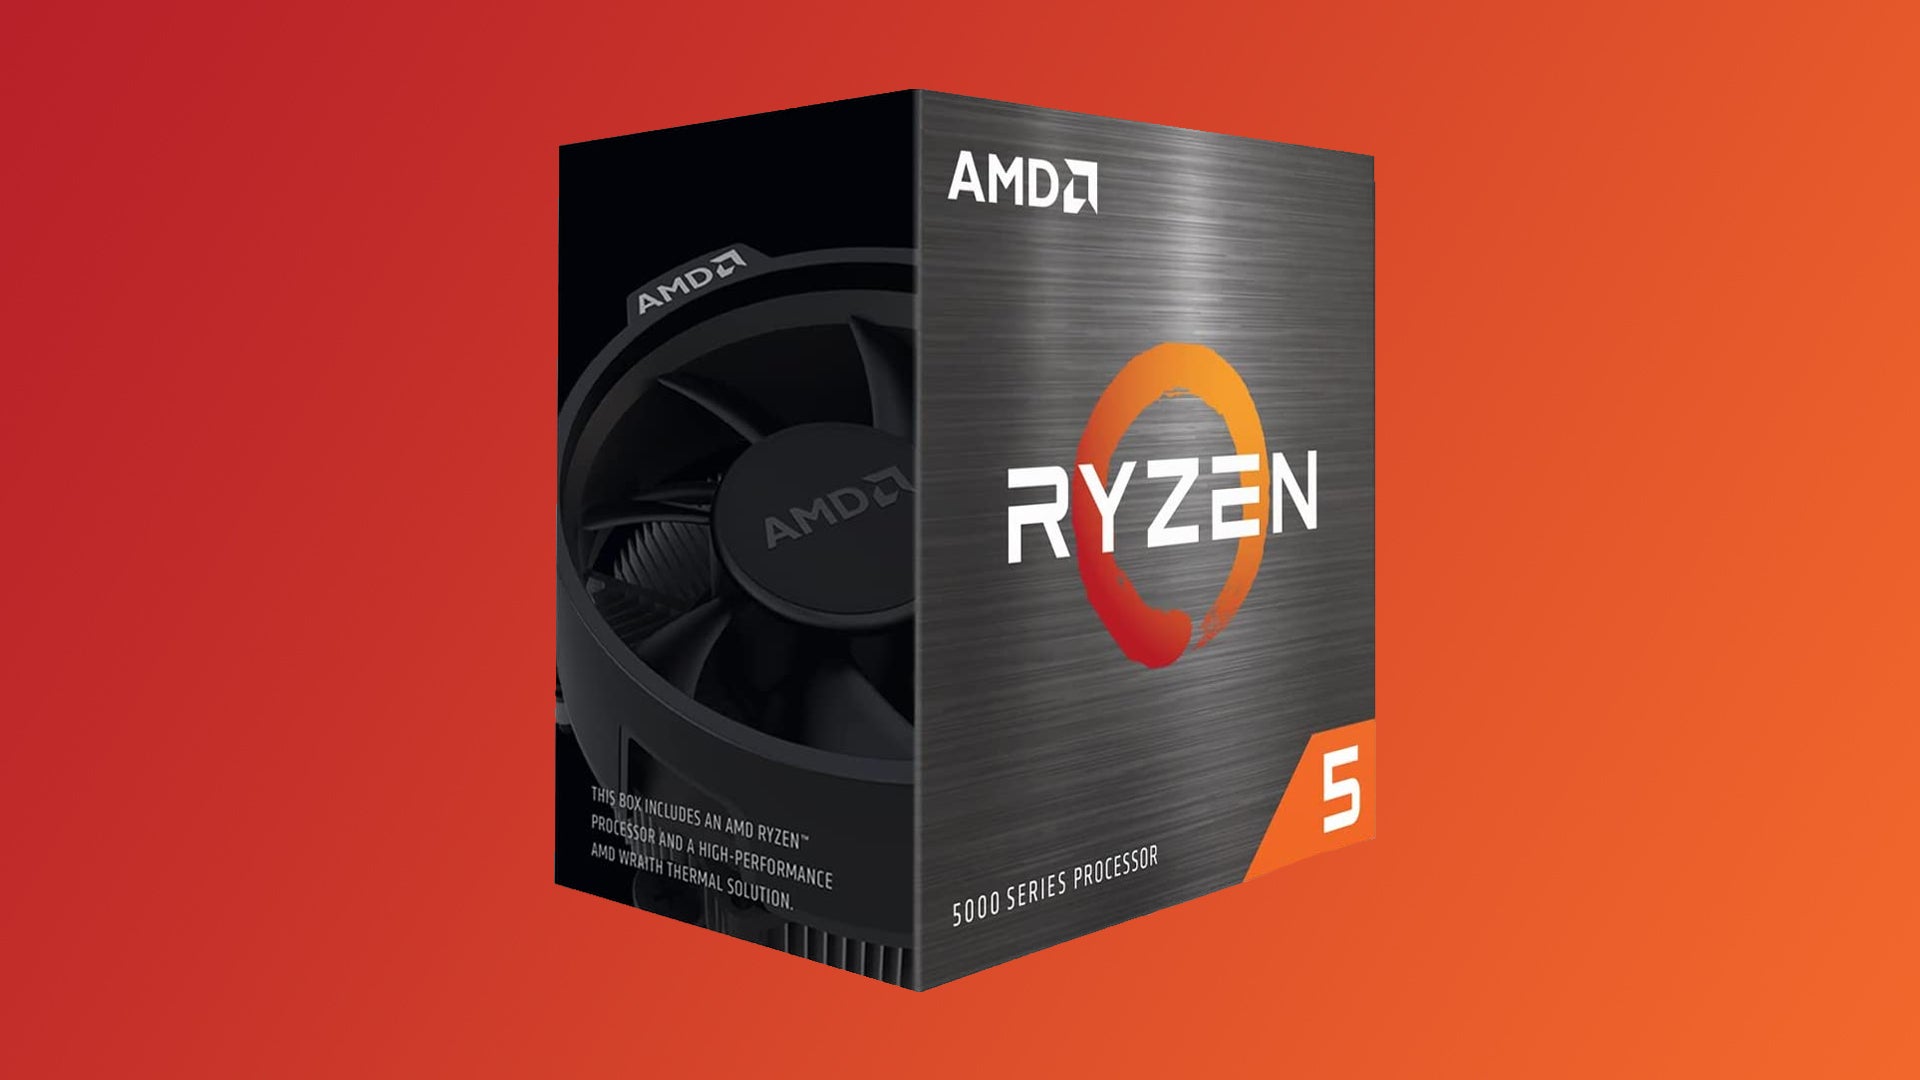 This AMD Ryzen 5 5600G with a free cooler is down to £112 from